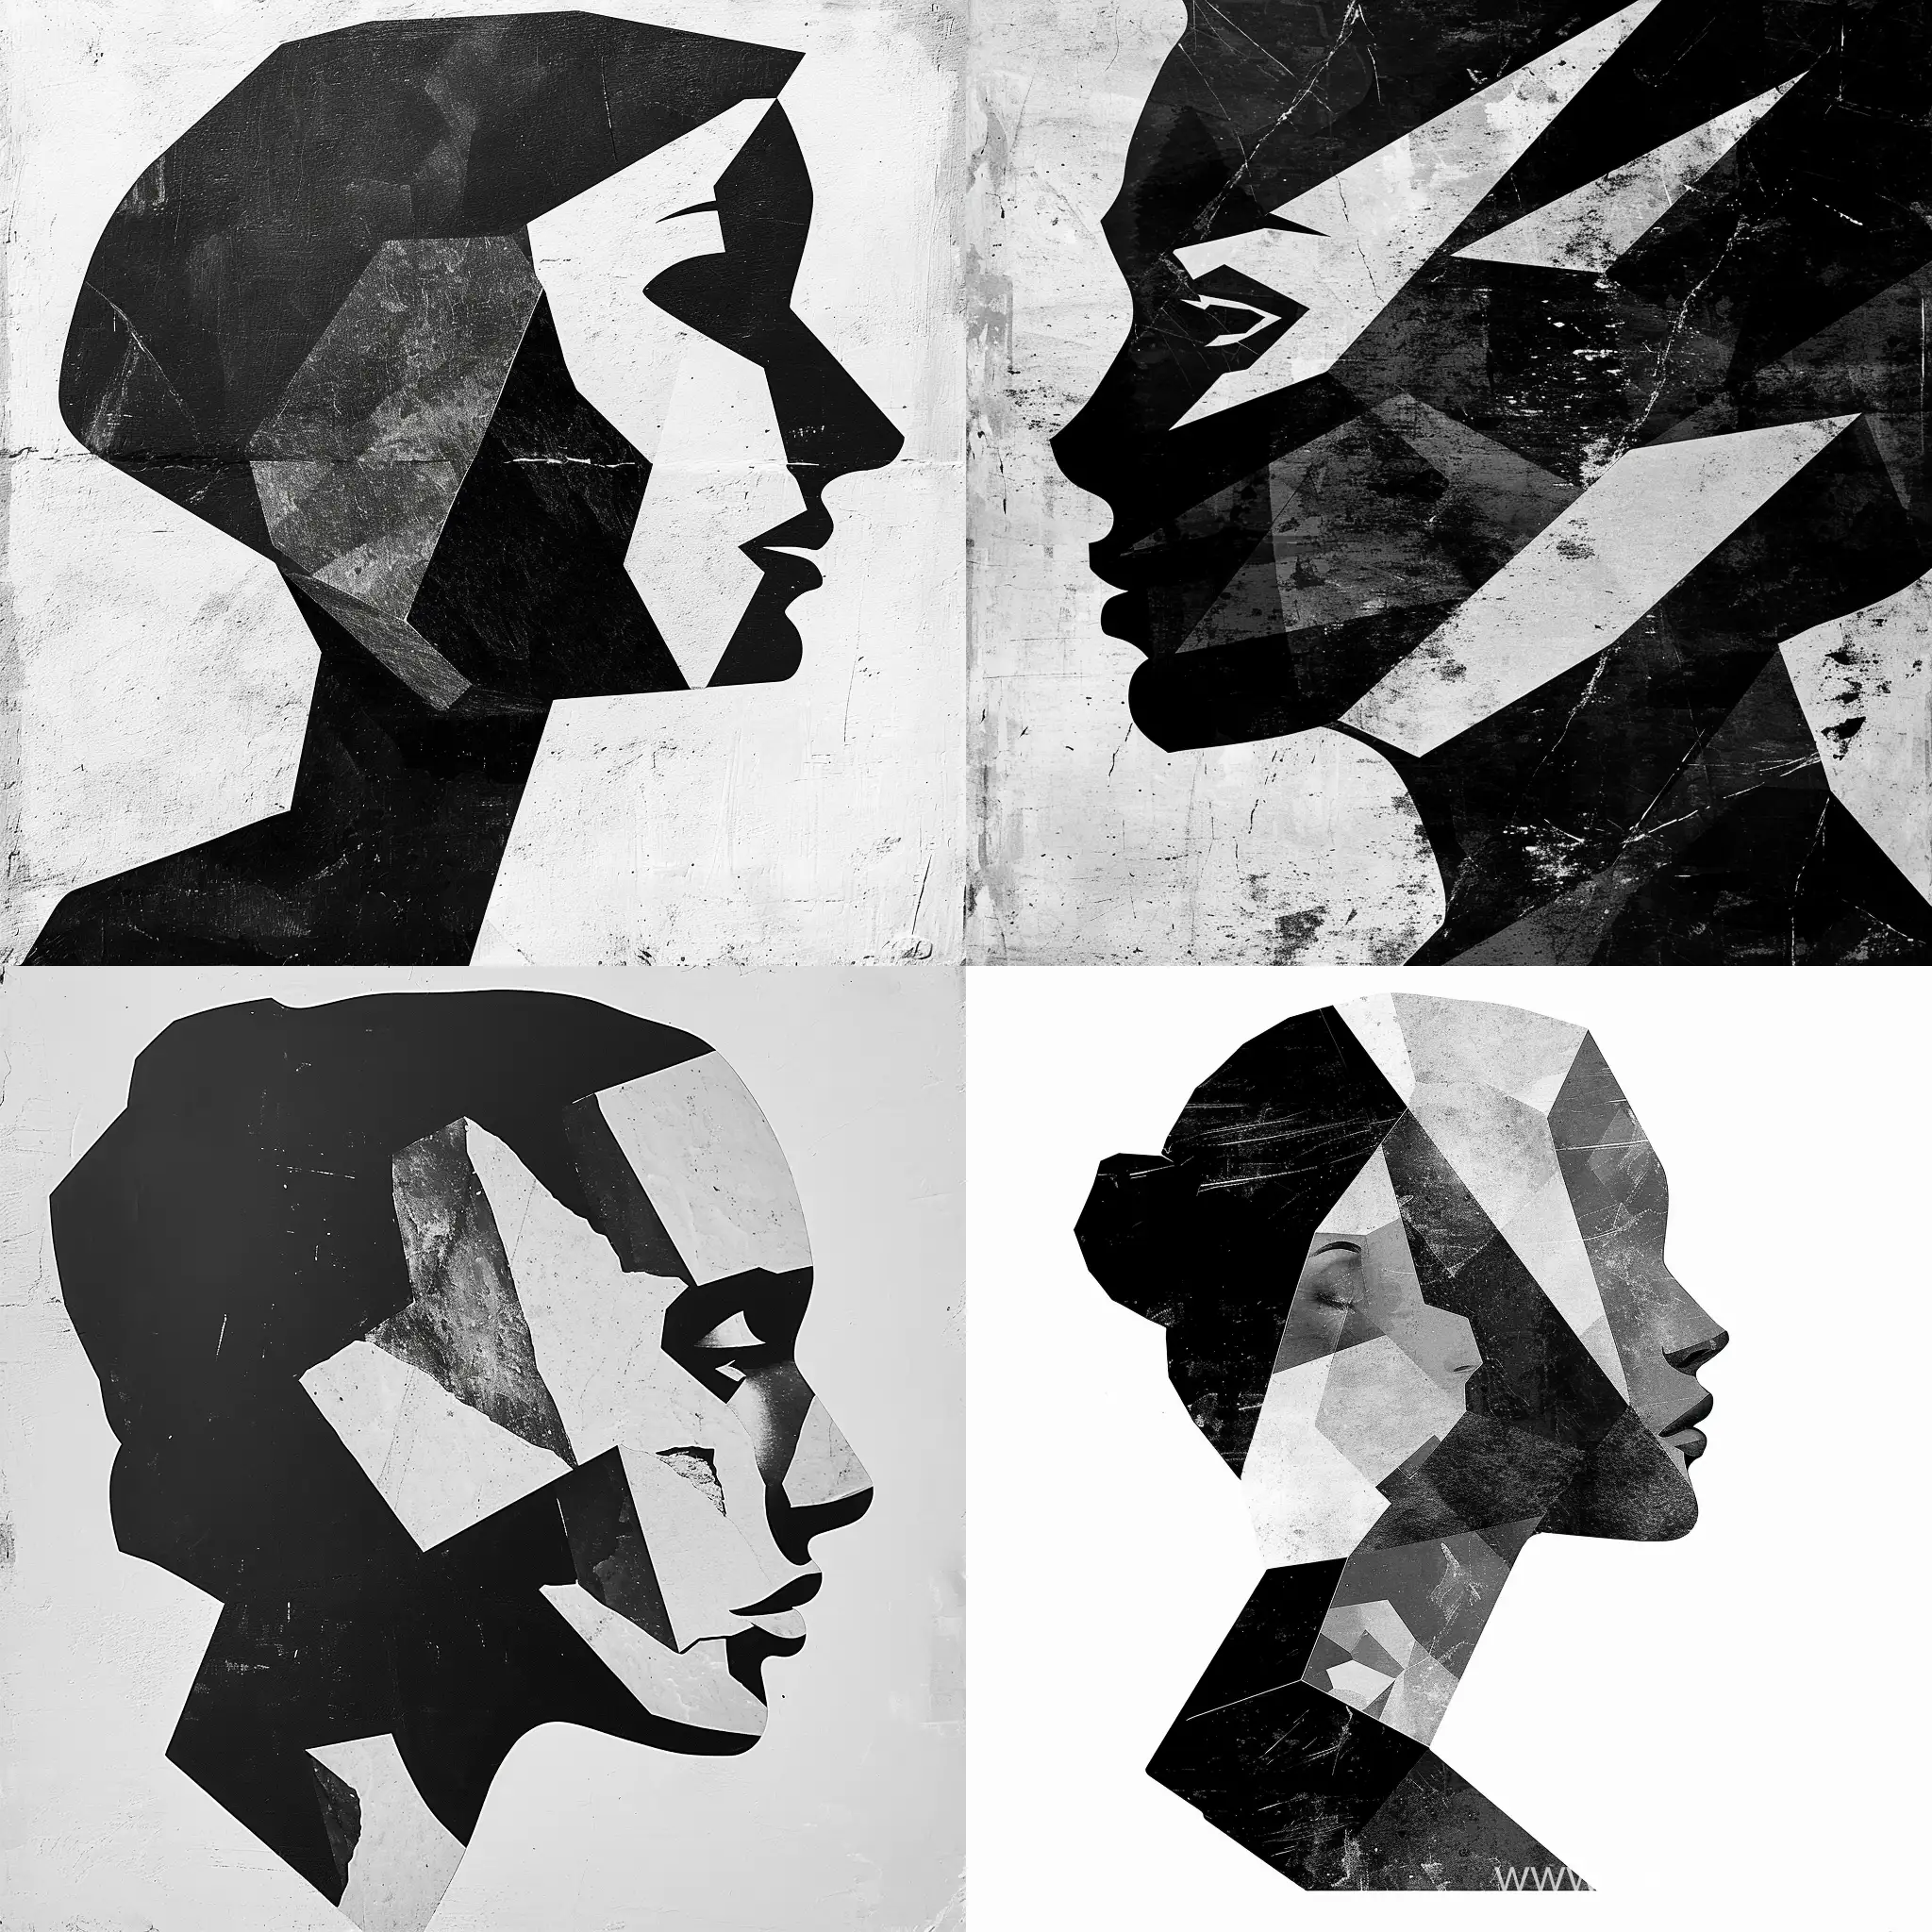 A silhouette of a cubist face, a symphony of muted shades. Abstract shapes inspired by the serenity of Mark Rothko's work, a minimalist noir composition that highlights the charm of a portrait of a horsewoman with this minimalist black and white illustration: EIN FELSEN DER VON NATUR AUS KRISTALLE BIRGT, graffiti v0.2